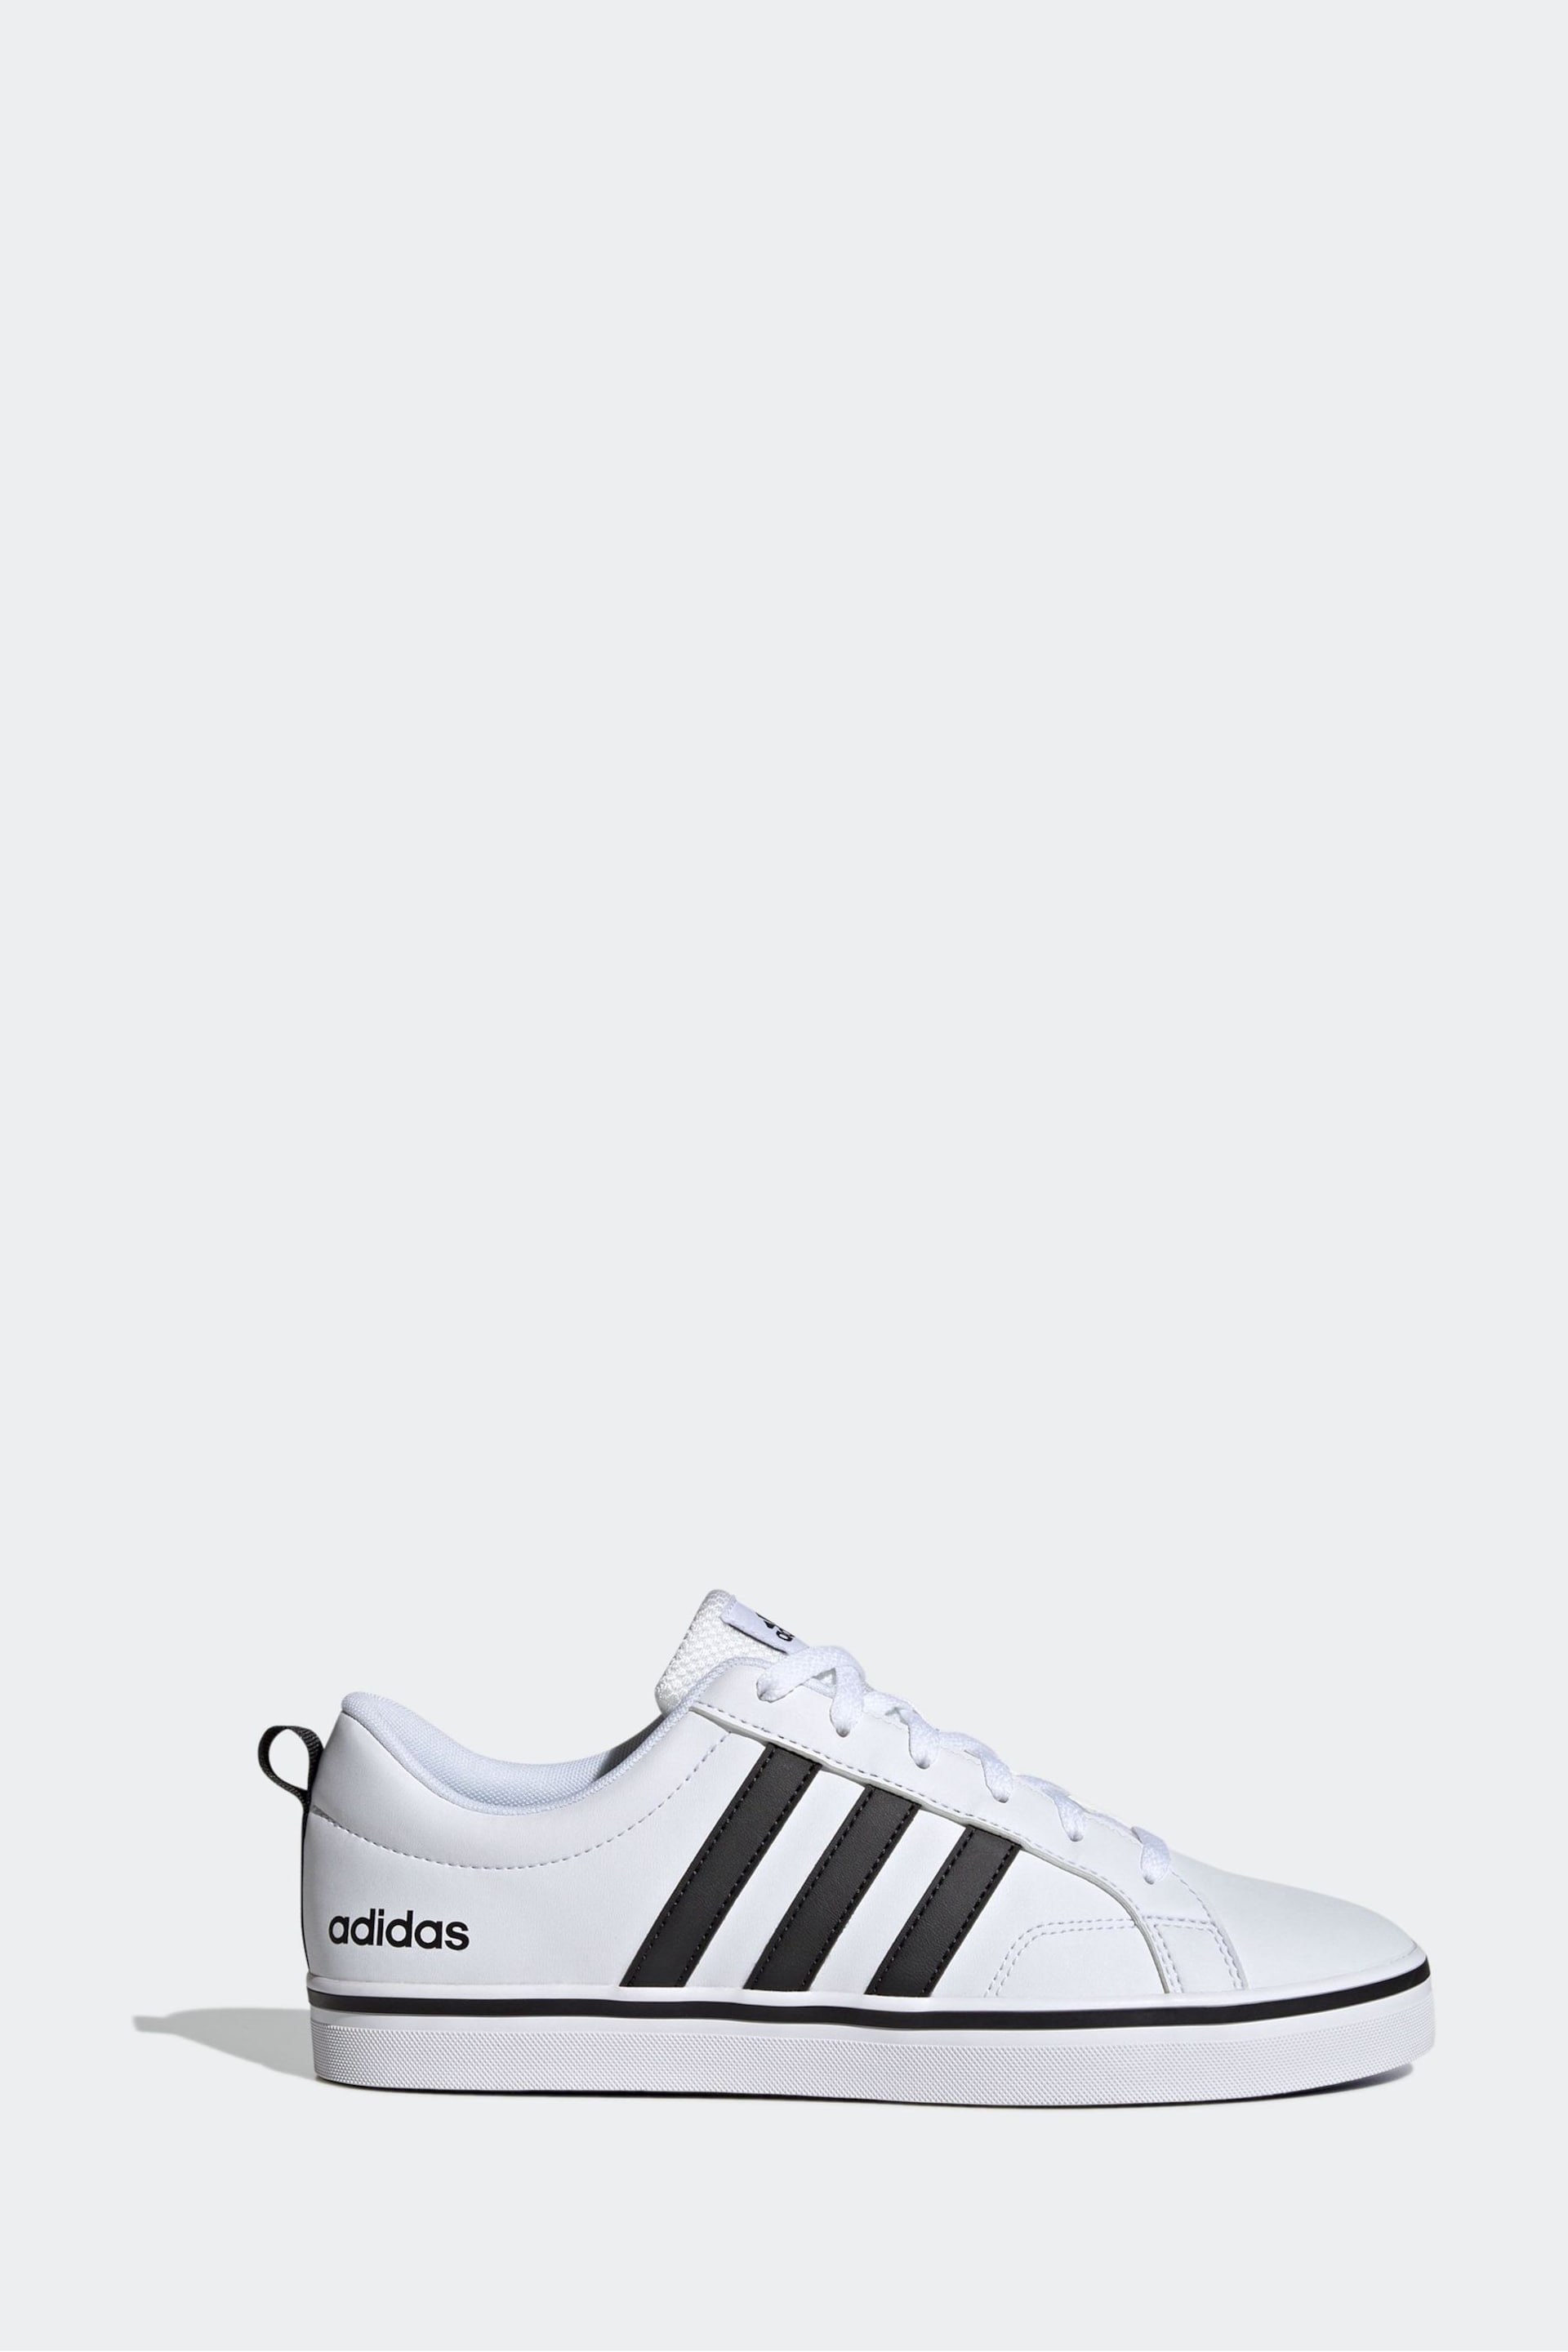 adidas White/Black Sportswear VS Pace Trainers - Image 1 of 9